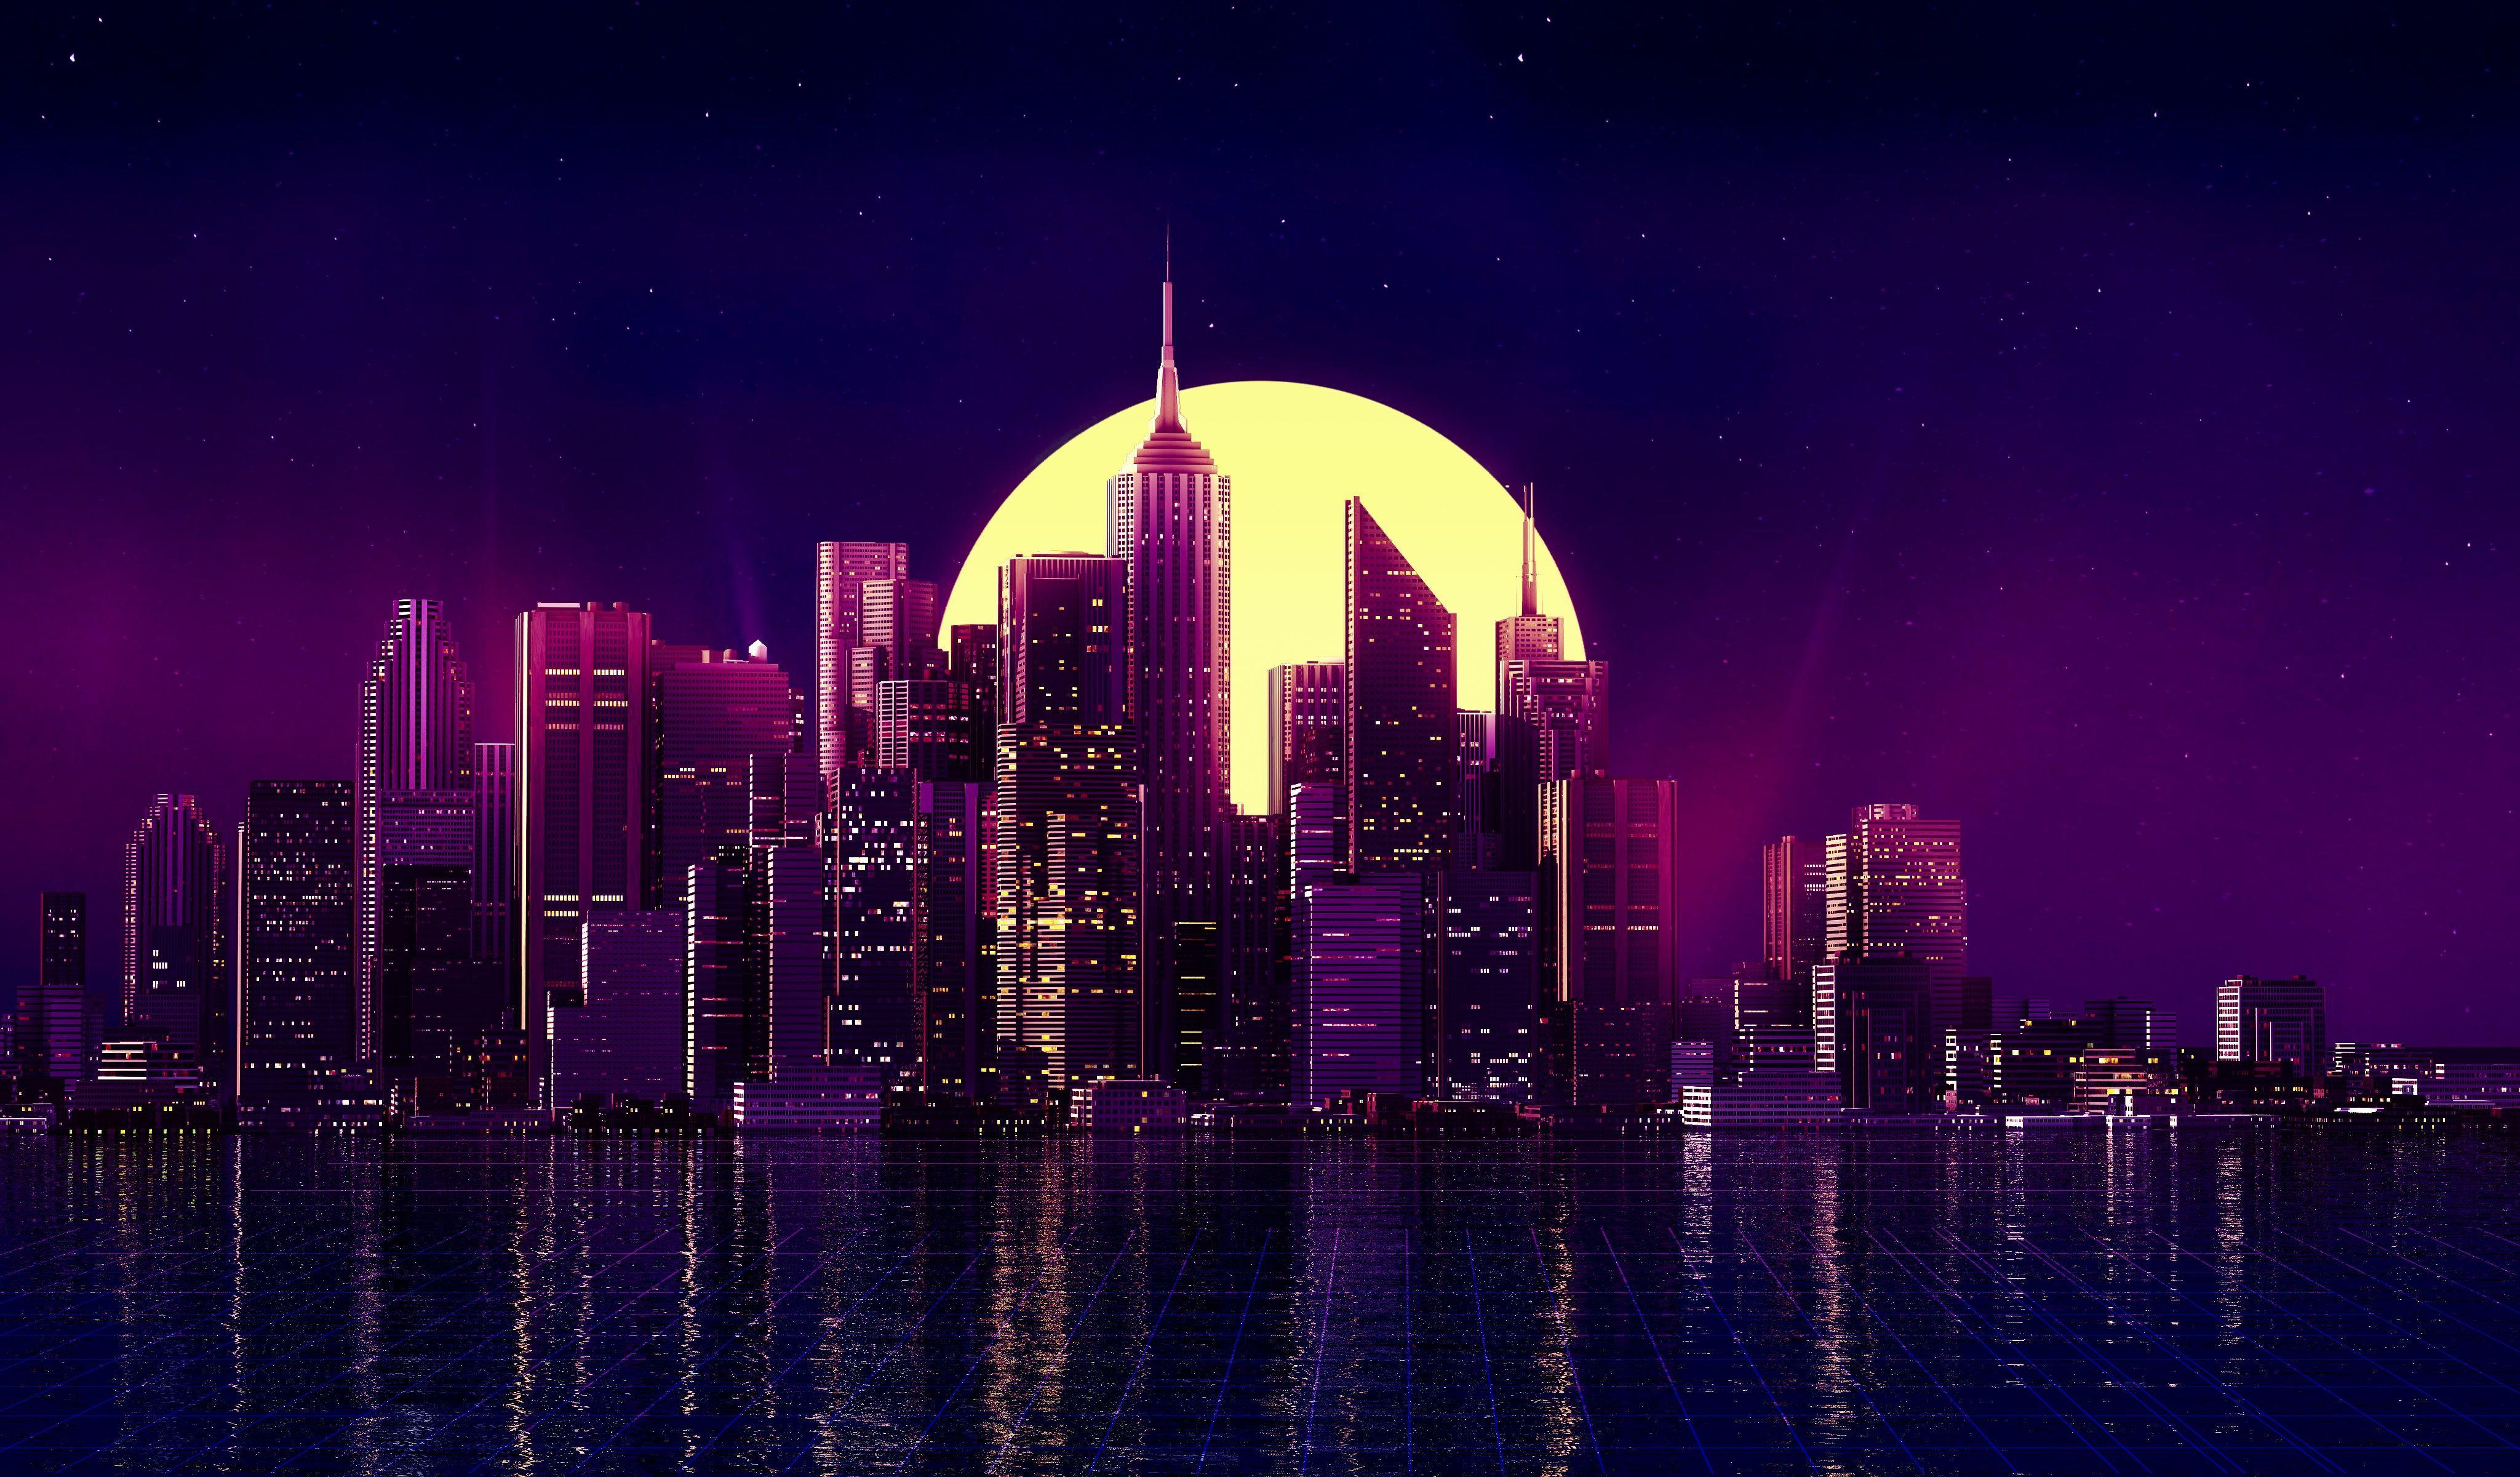 Neon City Wallpapers Top Free Neon City Backgrounds Wallpaperaccess